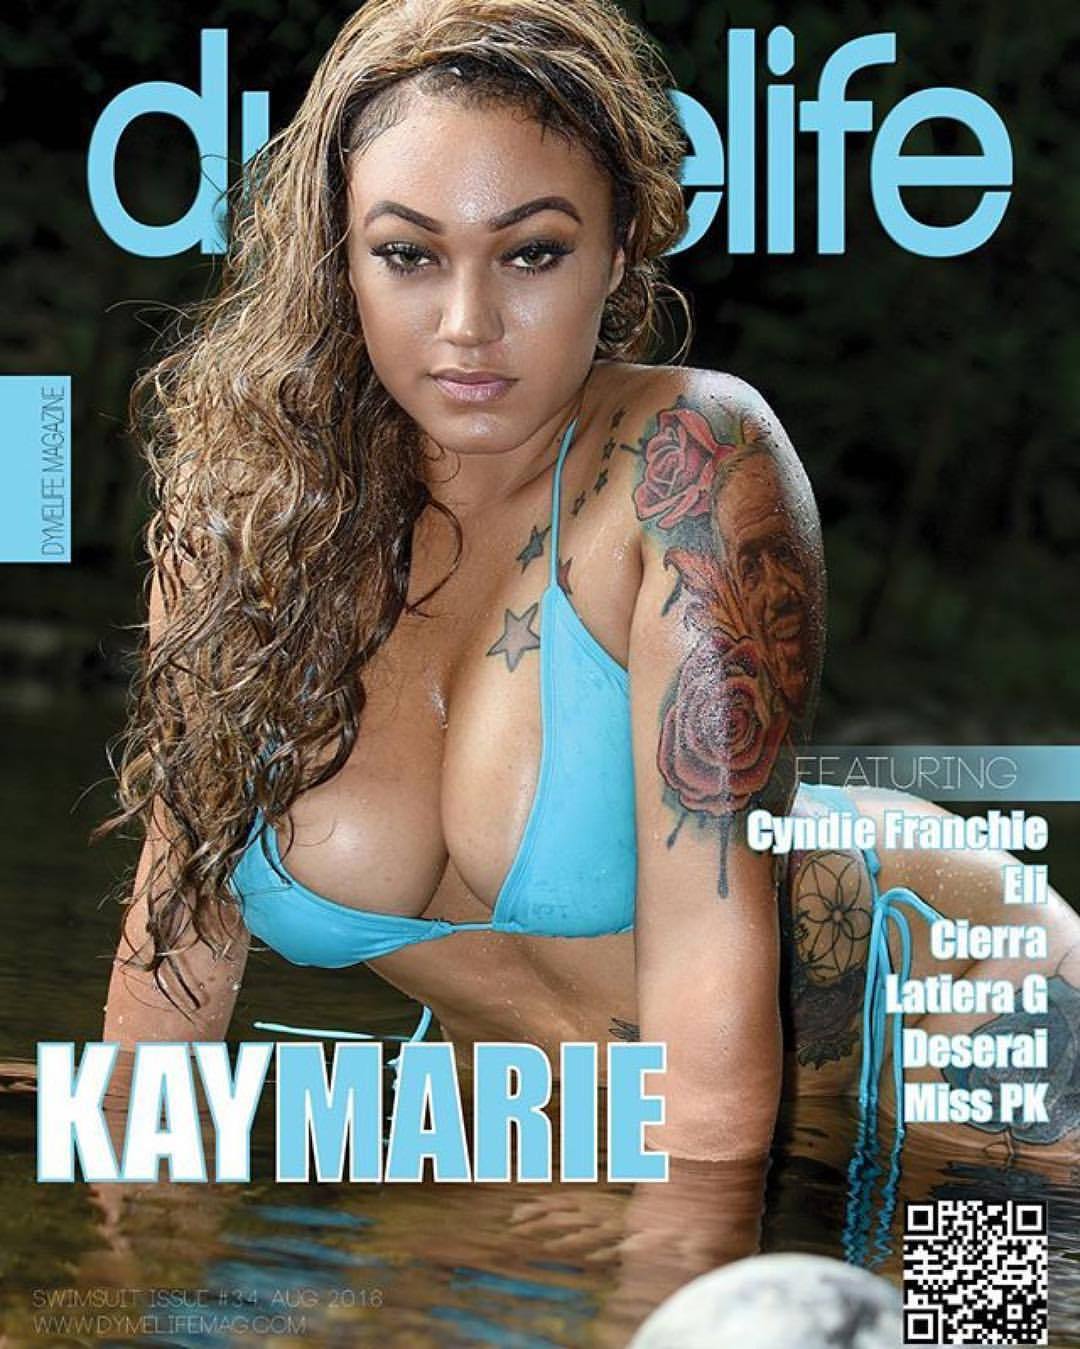 Yr in review covers #Repost @dymelifemag ・・・ www.dymelifemag.com #34 #cover